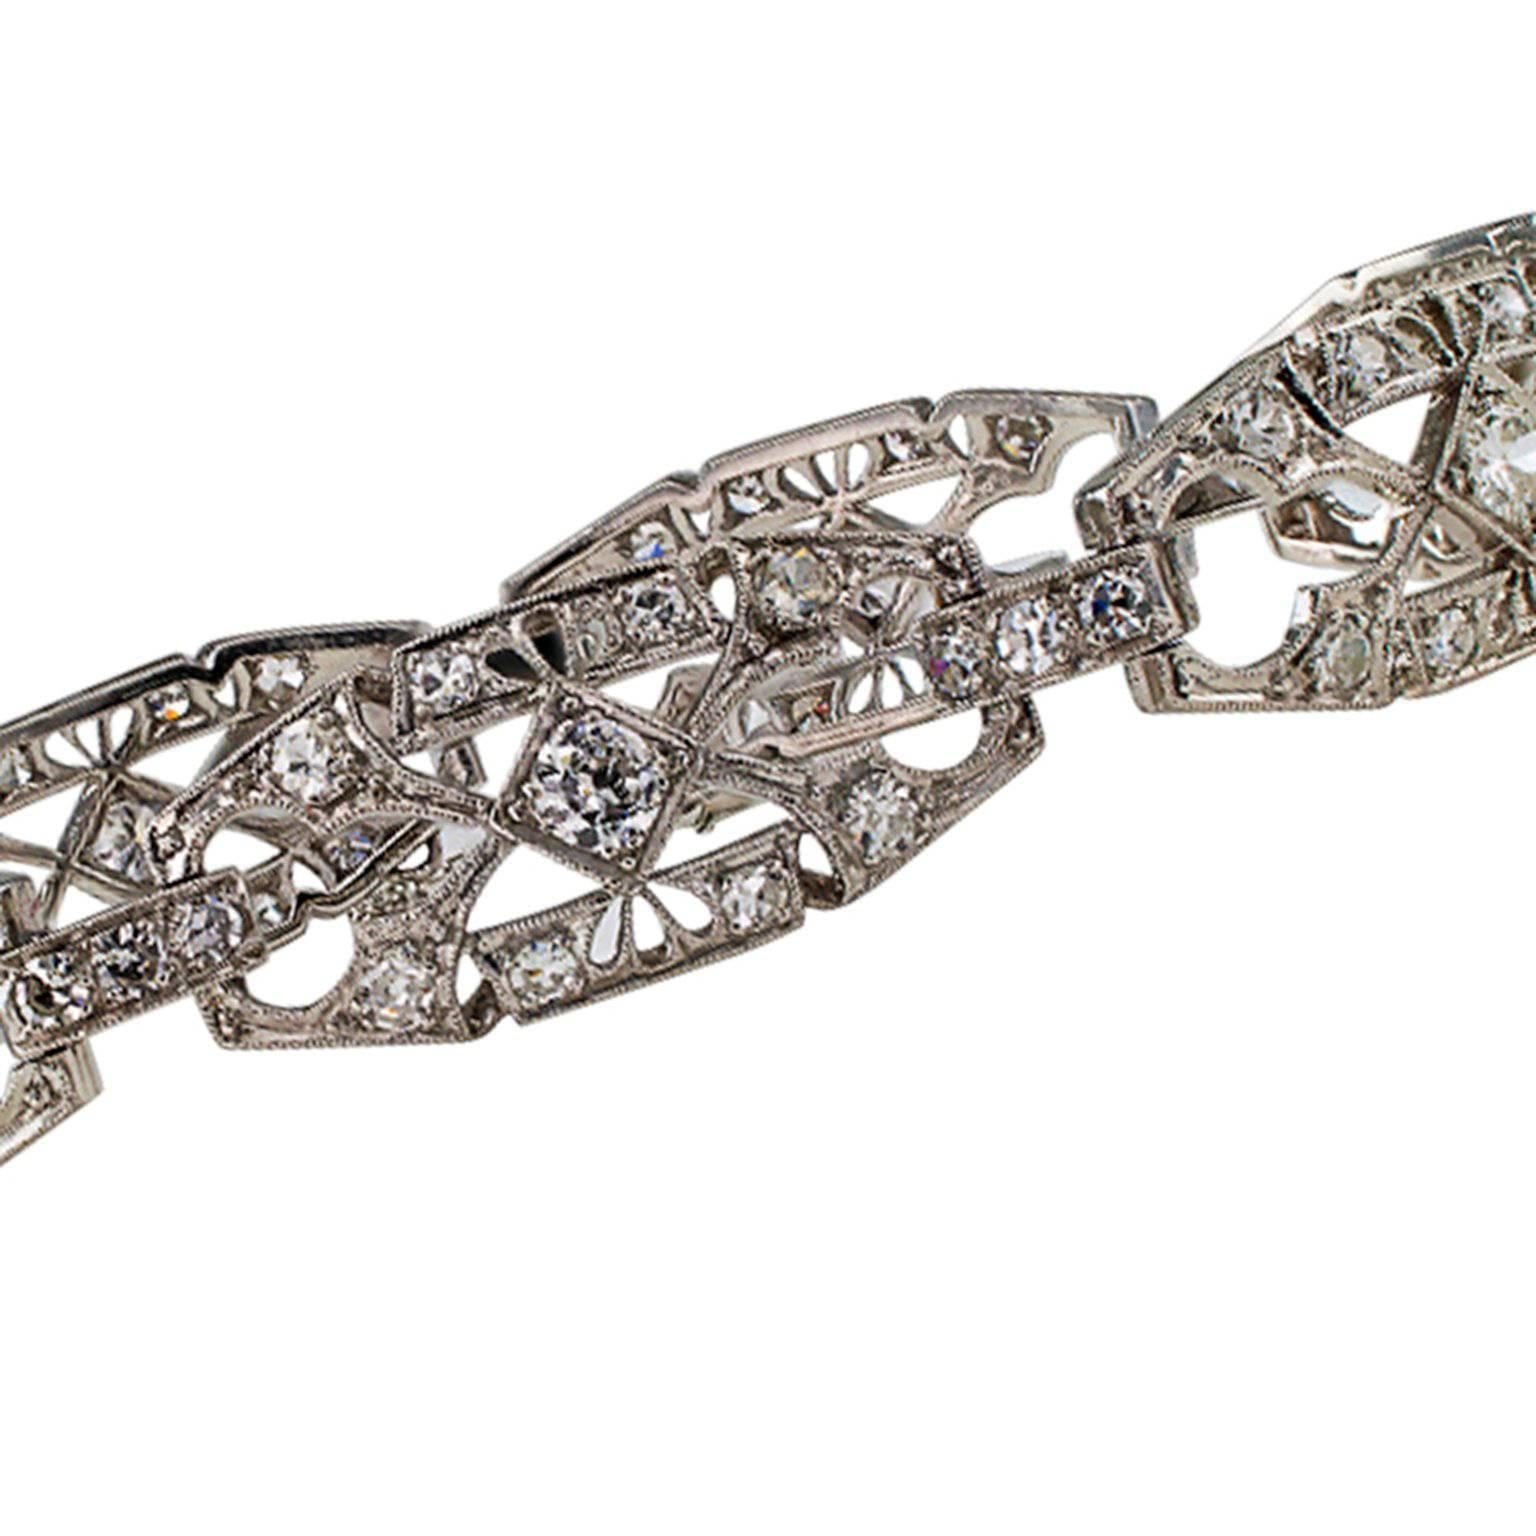 1930s Art Deco Diamond and Platinum Bracelet

1930's Art Deco 2.75 carats diamond bracelet mounted in platinum.  This Art Deco design is characterized by an airy and lace-like appearance provided by the open work links decorated with millegrain,